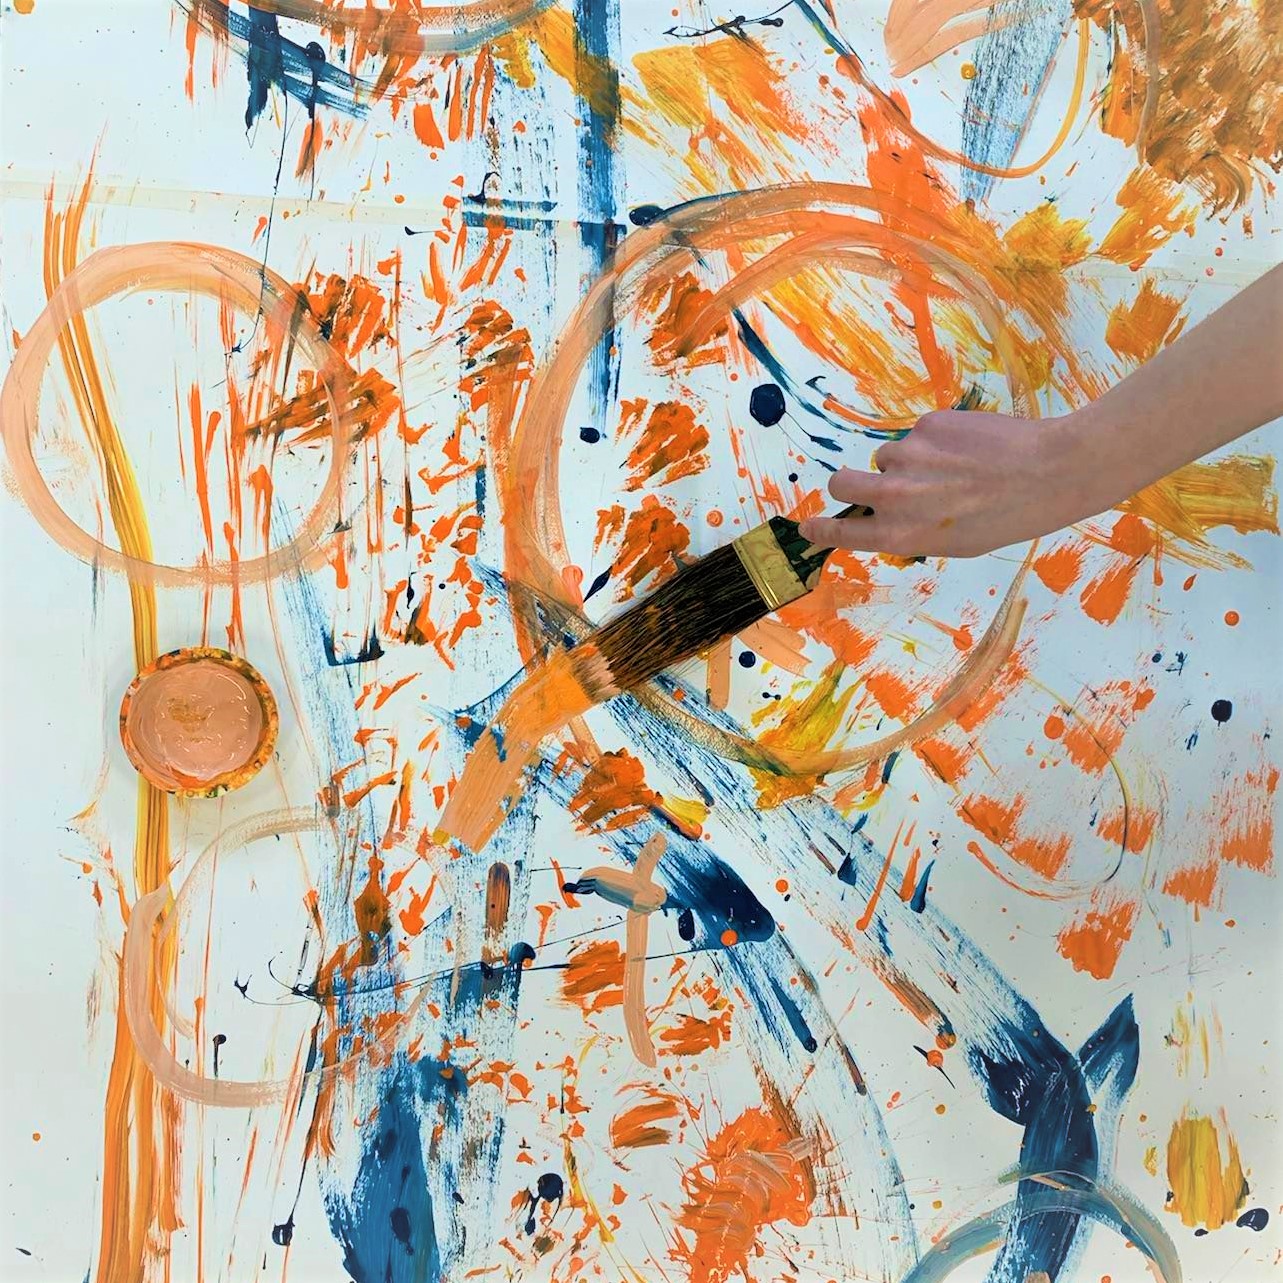 Action Painting Camp (ages 11 to 14)